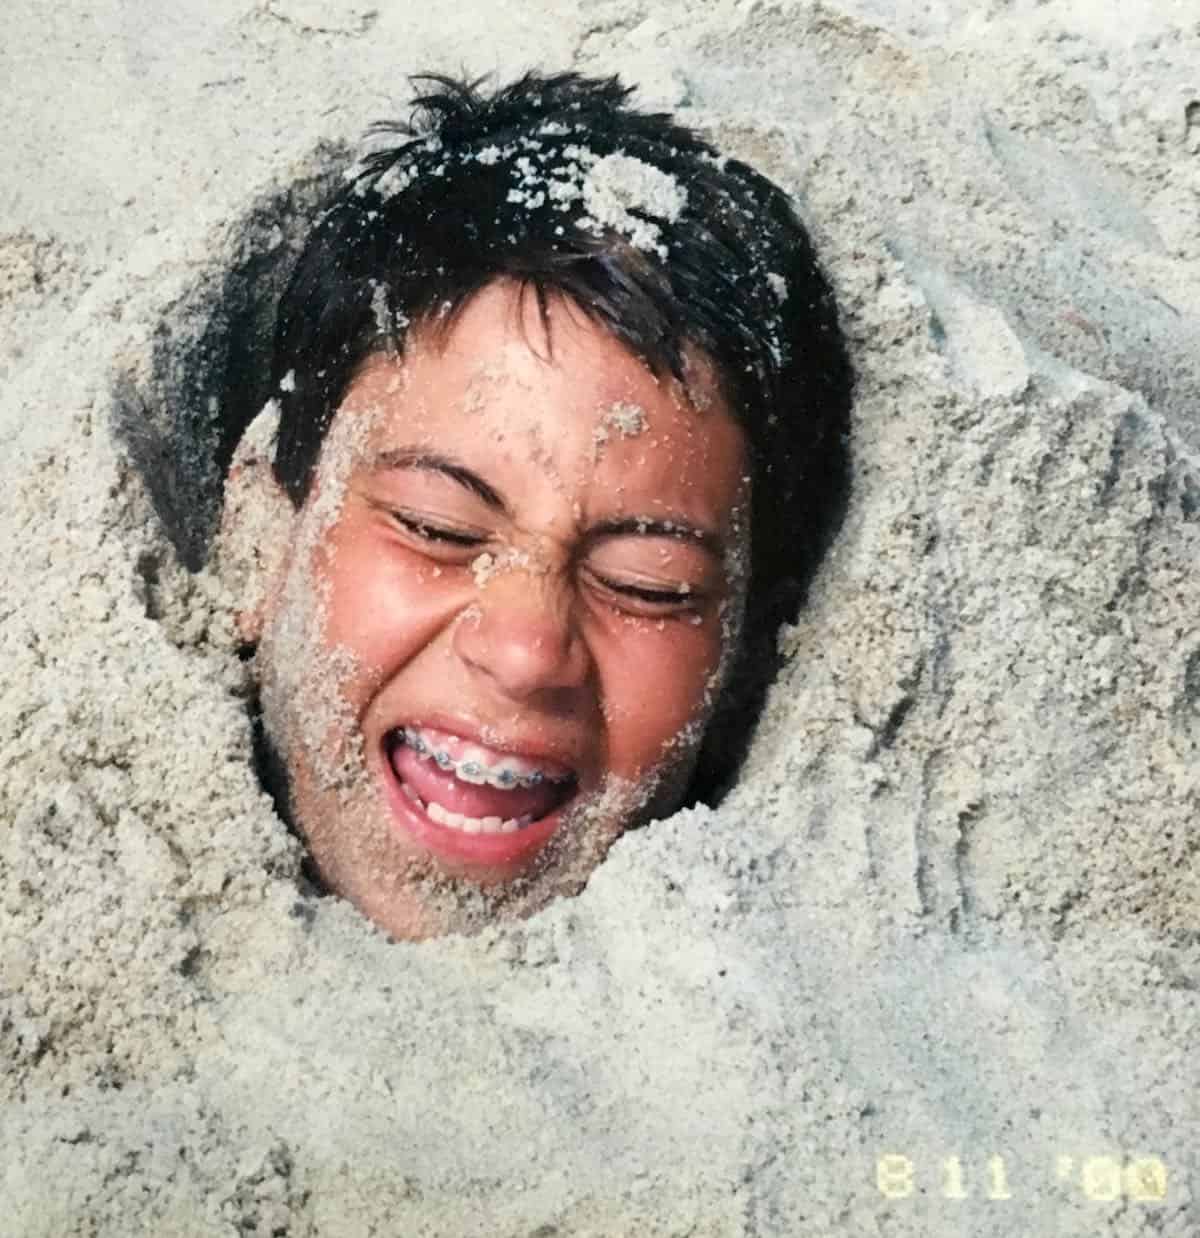 young William buried in the beach sand